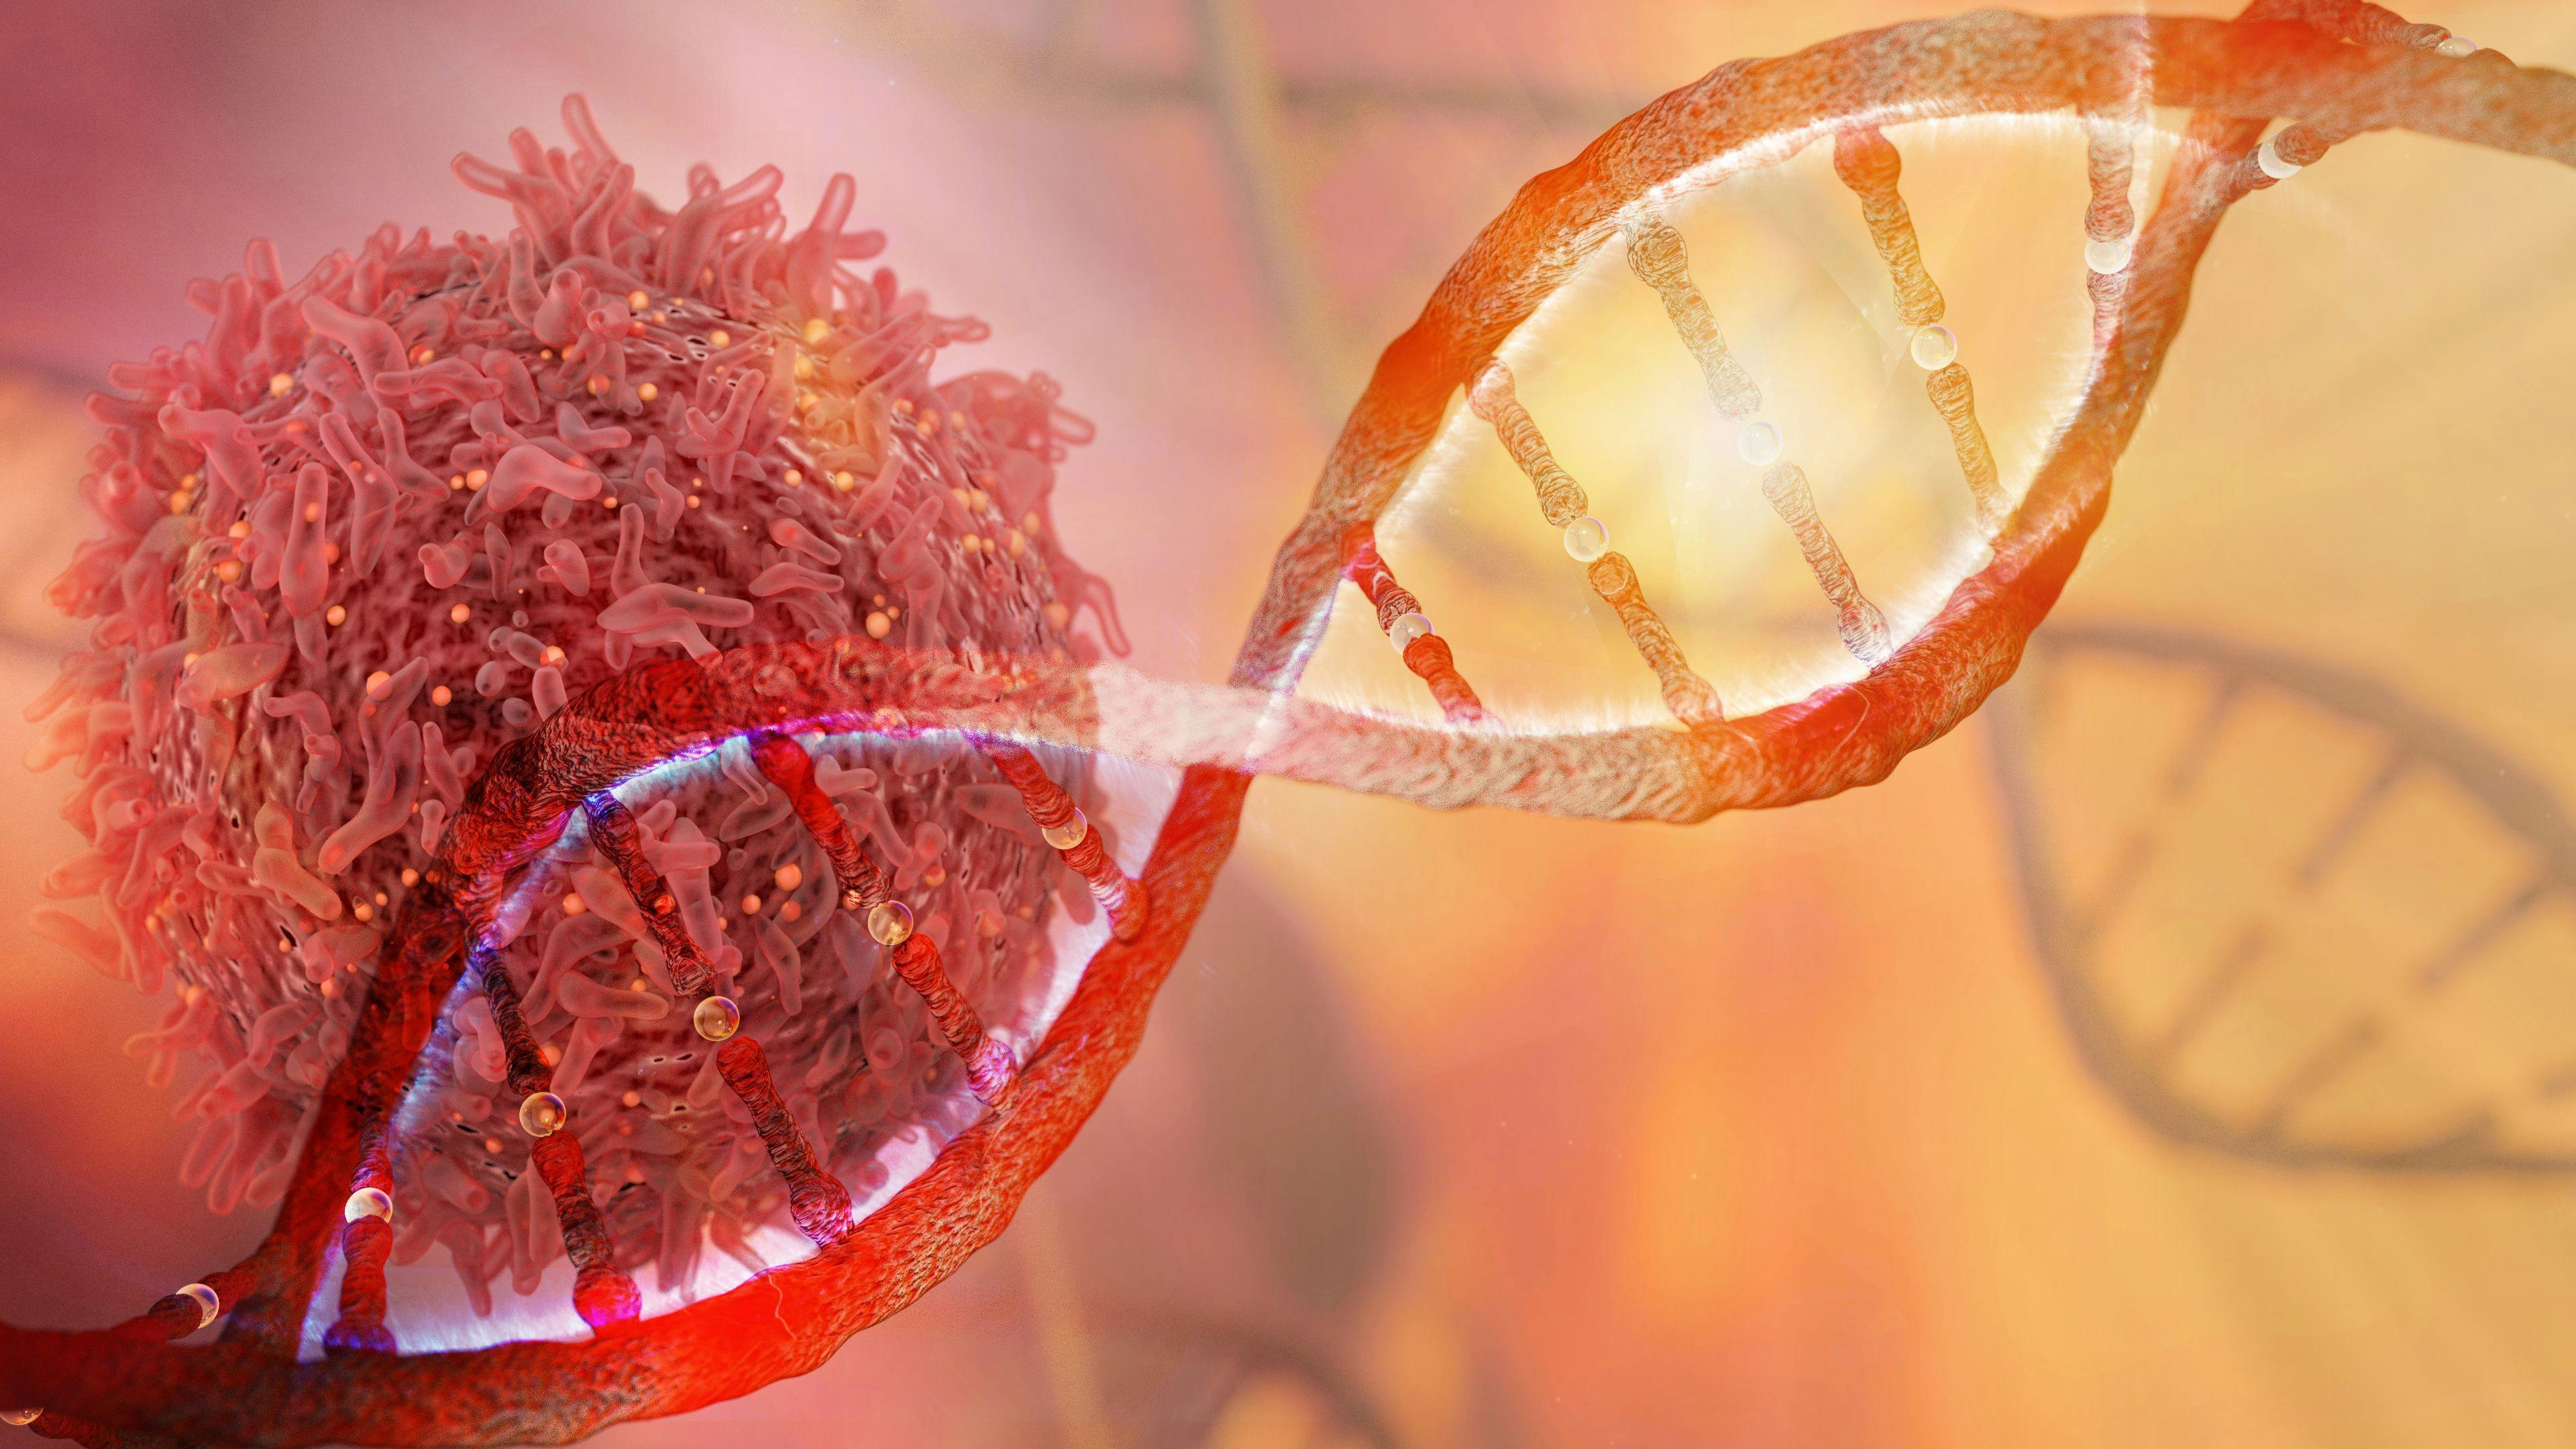 DNA strand and Cancer Cell Oncology | Image Credit: catalin - stock.adobe.com